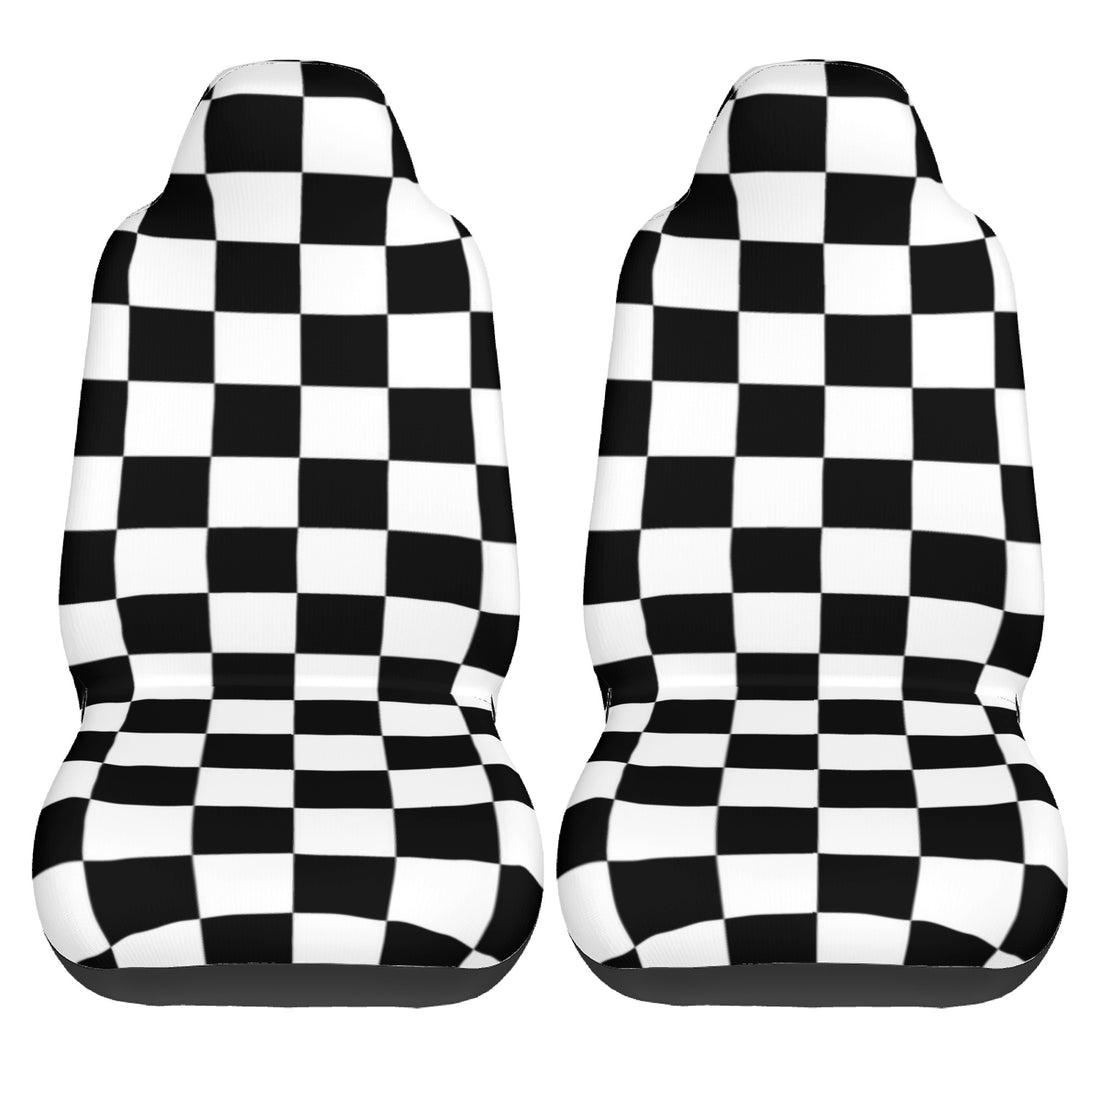 HC_T26 Car Seat Covers with Back Side Printed Black and White Home-clothes-jewelry